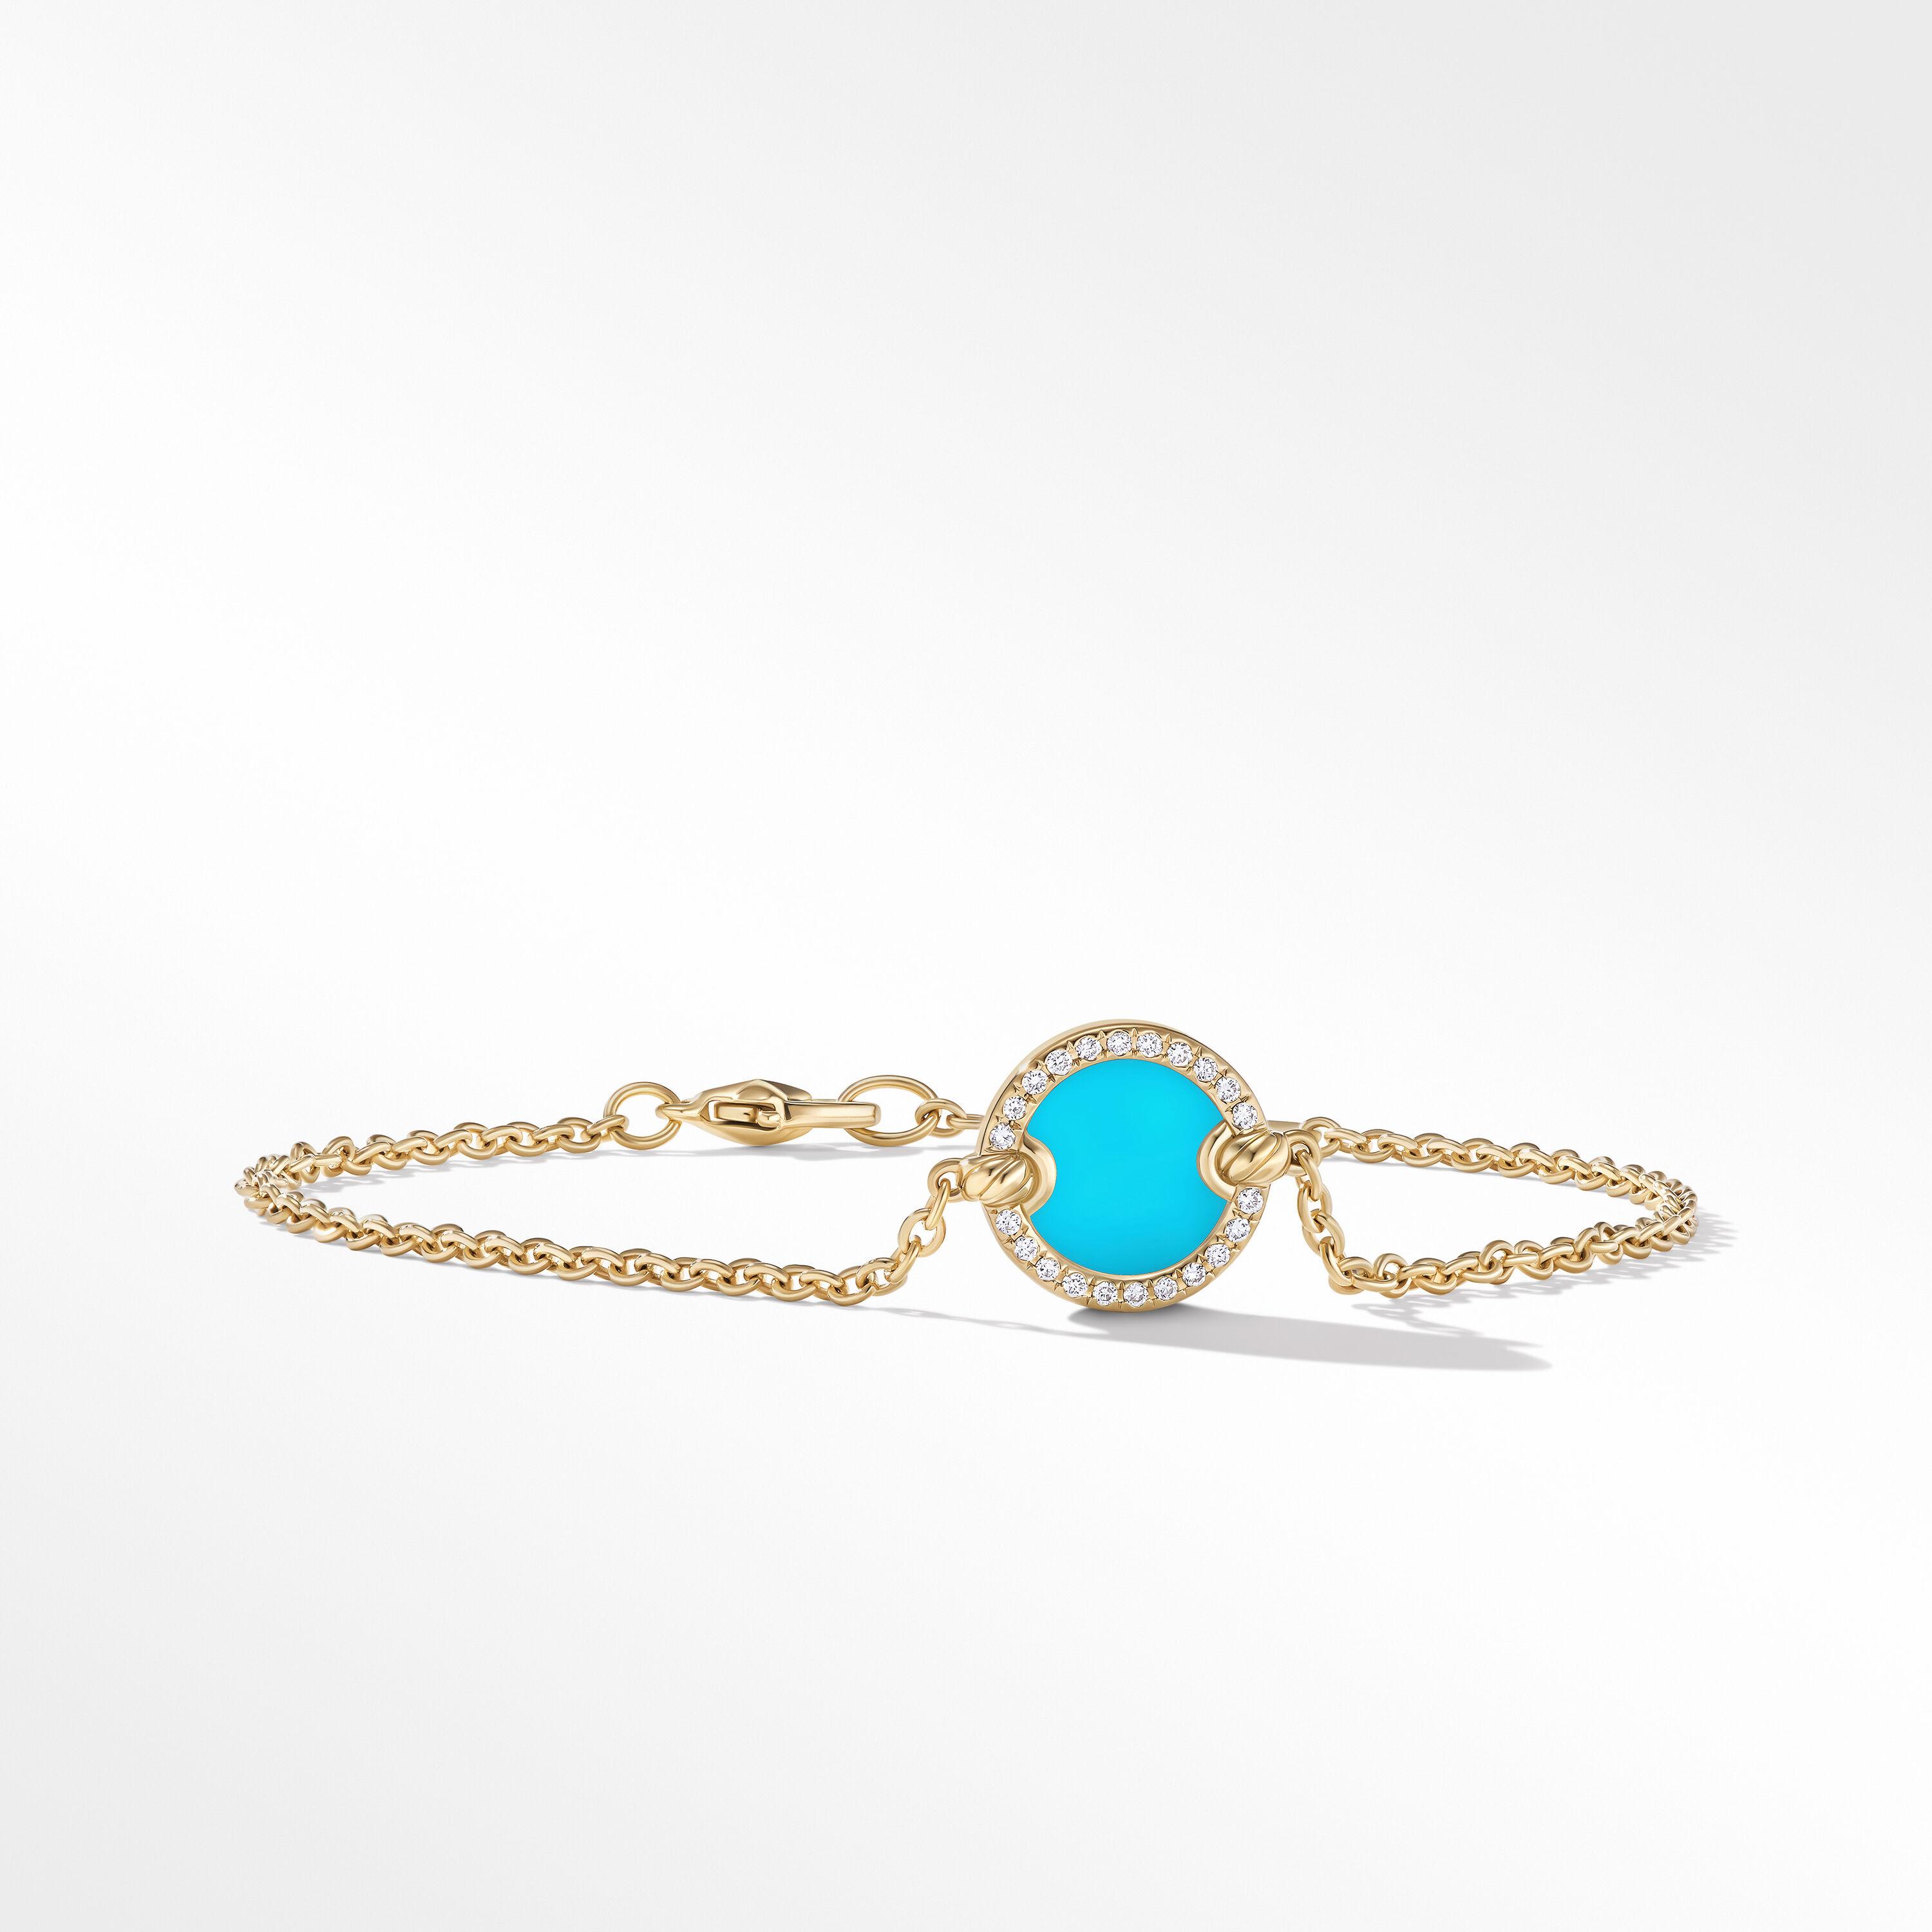 David Yurman Petite DY Elements Center Station Chain Bracelet with Turquoise and Pave Diamonds